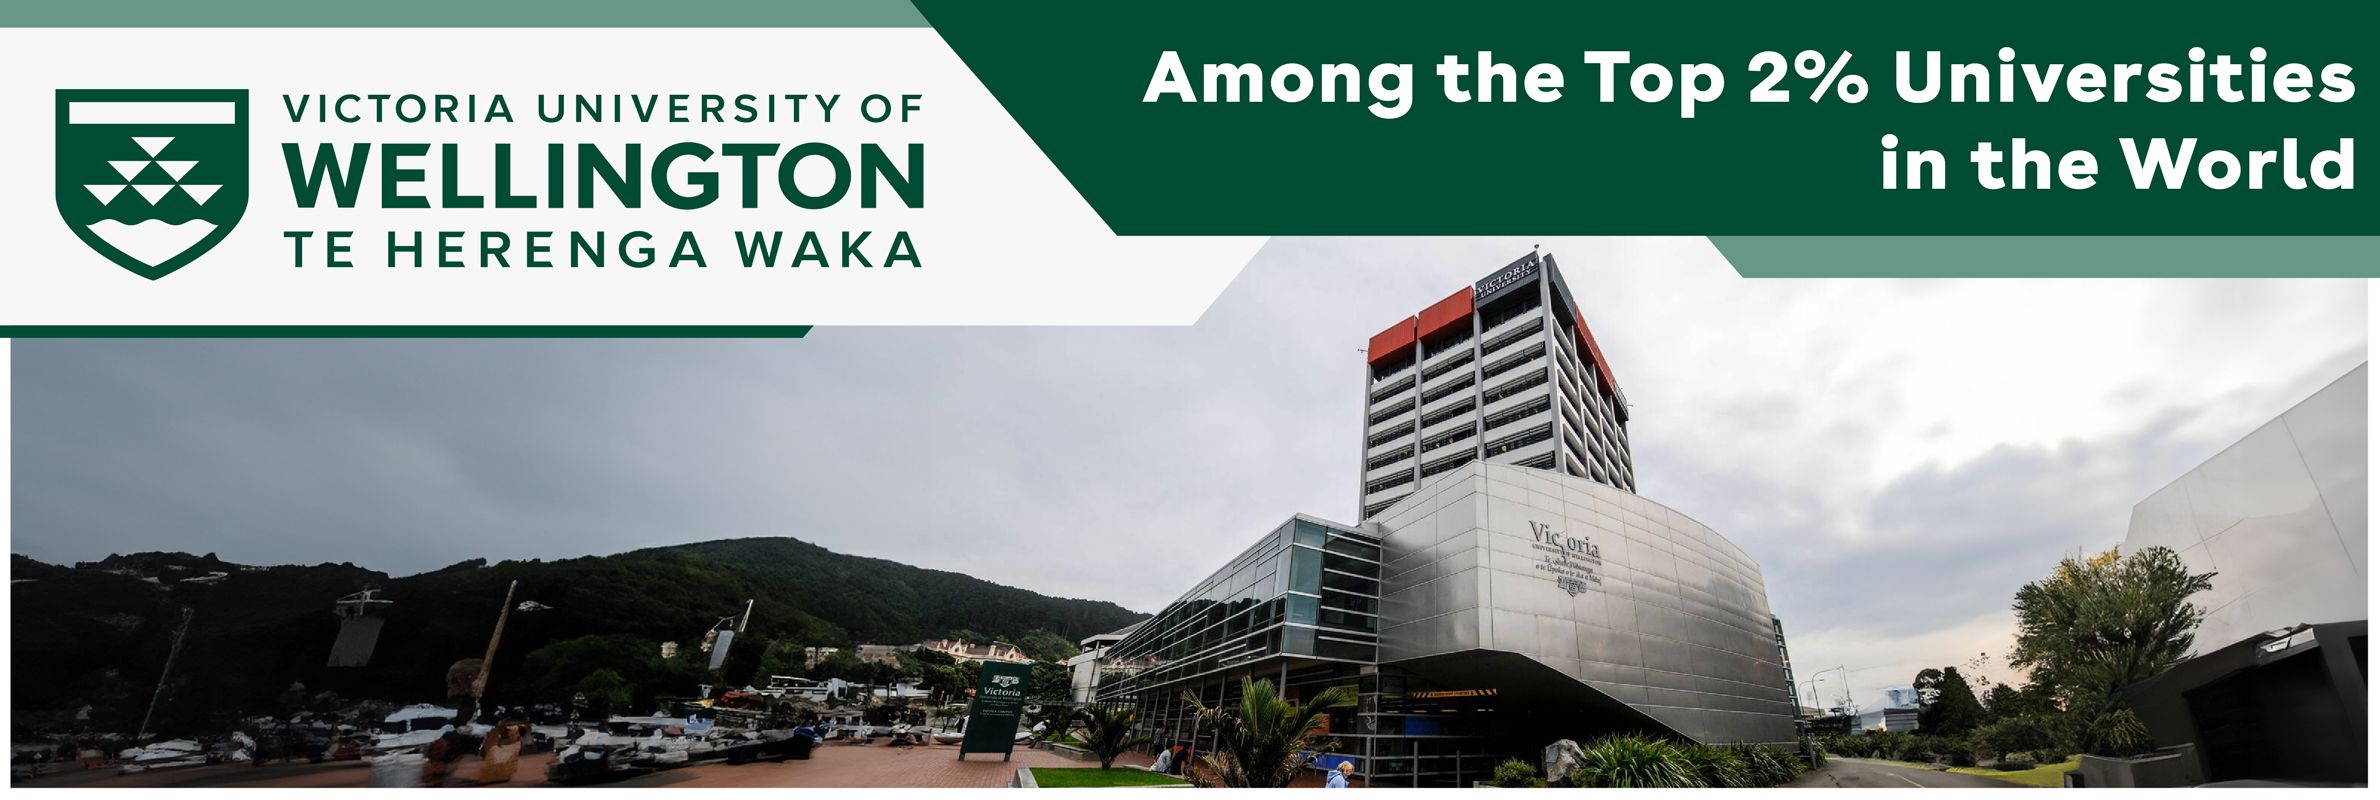 Victoria University of Wellington, New Zealand: A Leading University with Triple Crown Accreditation